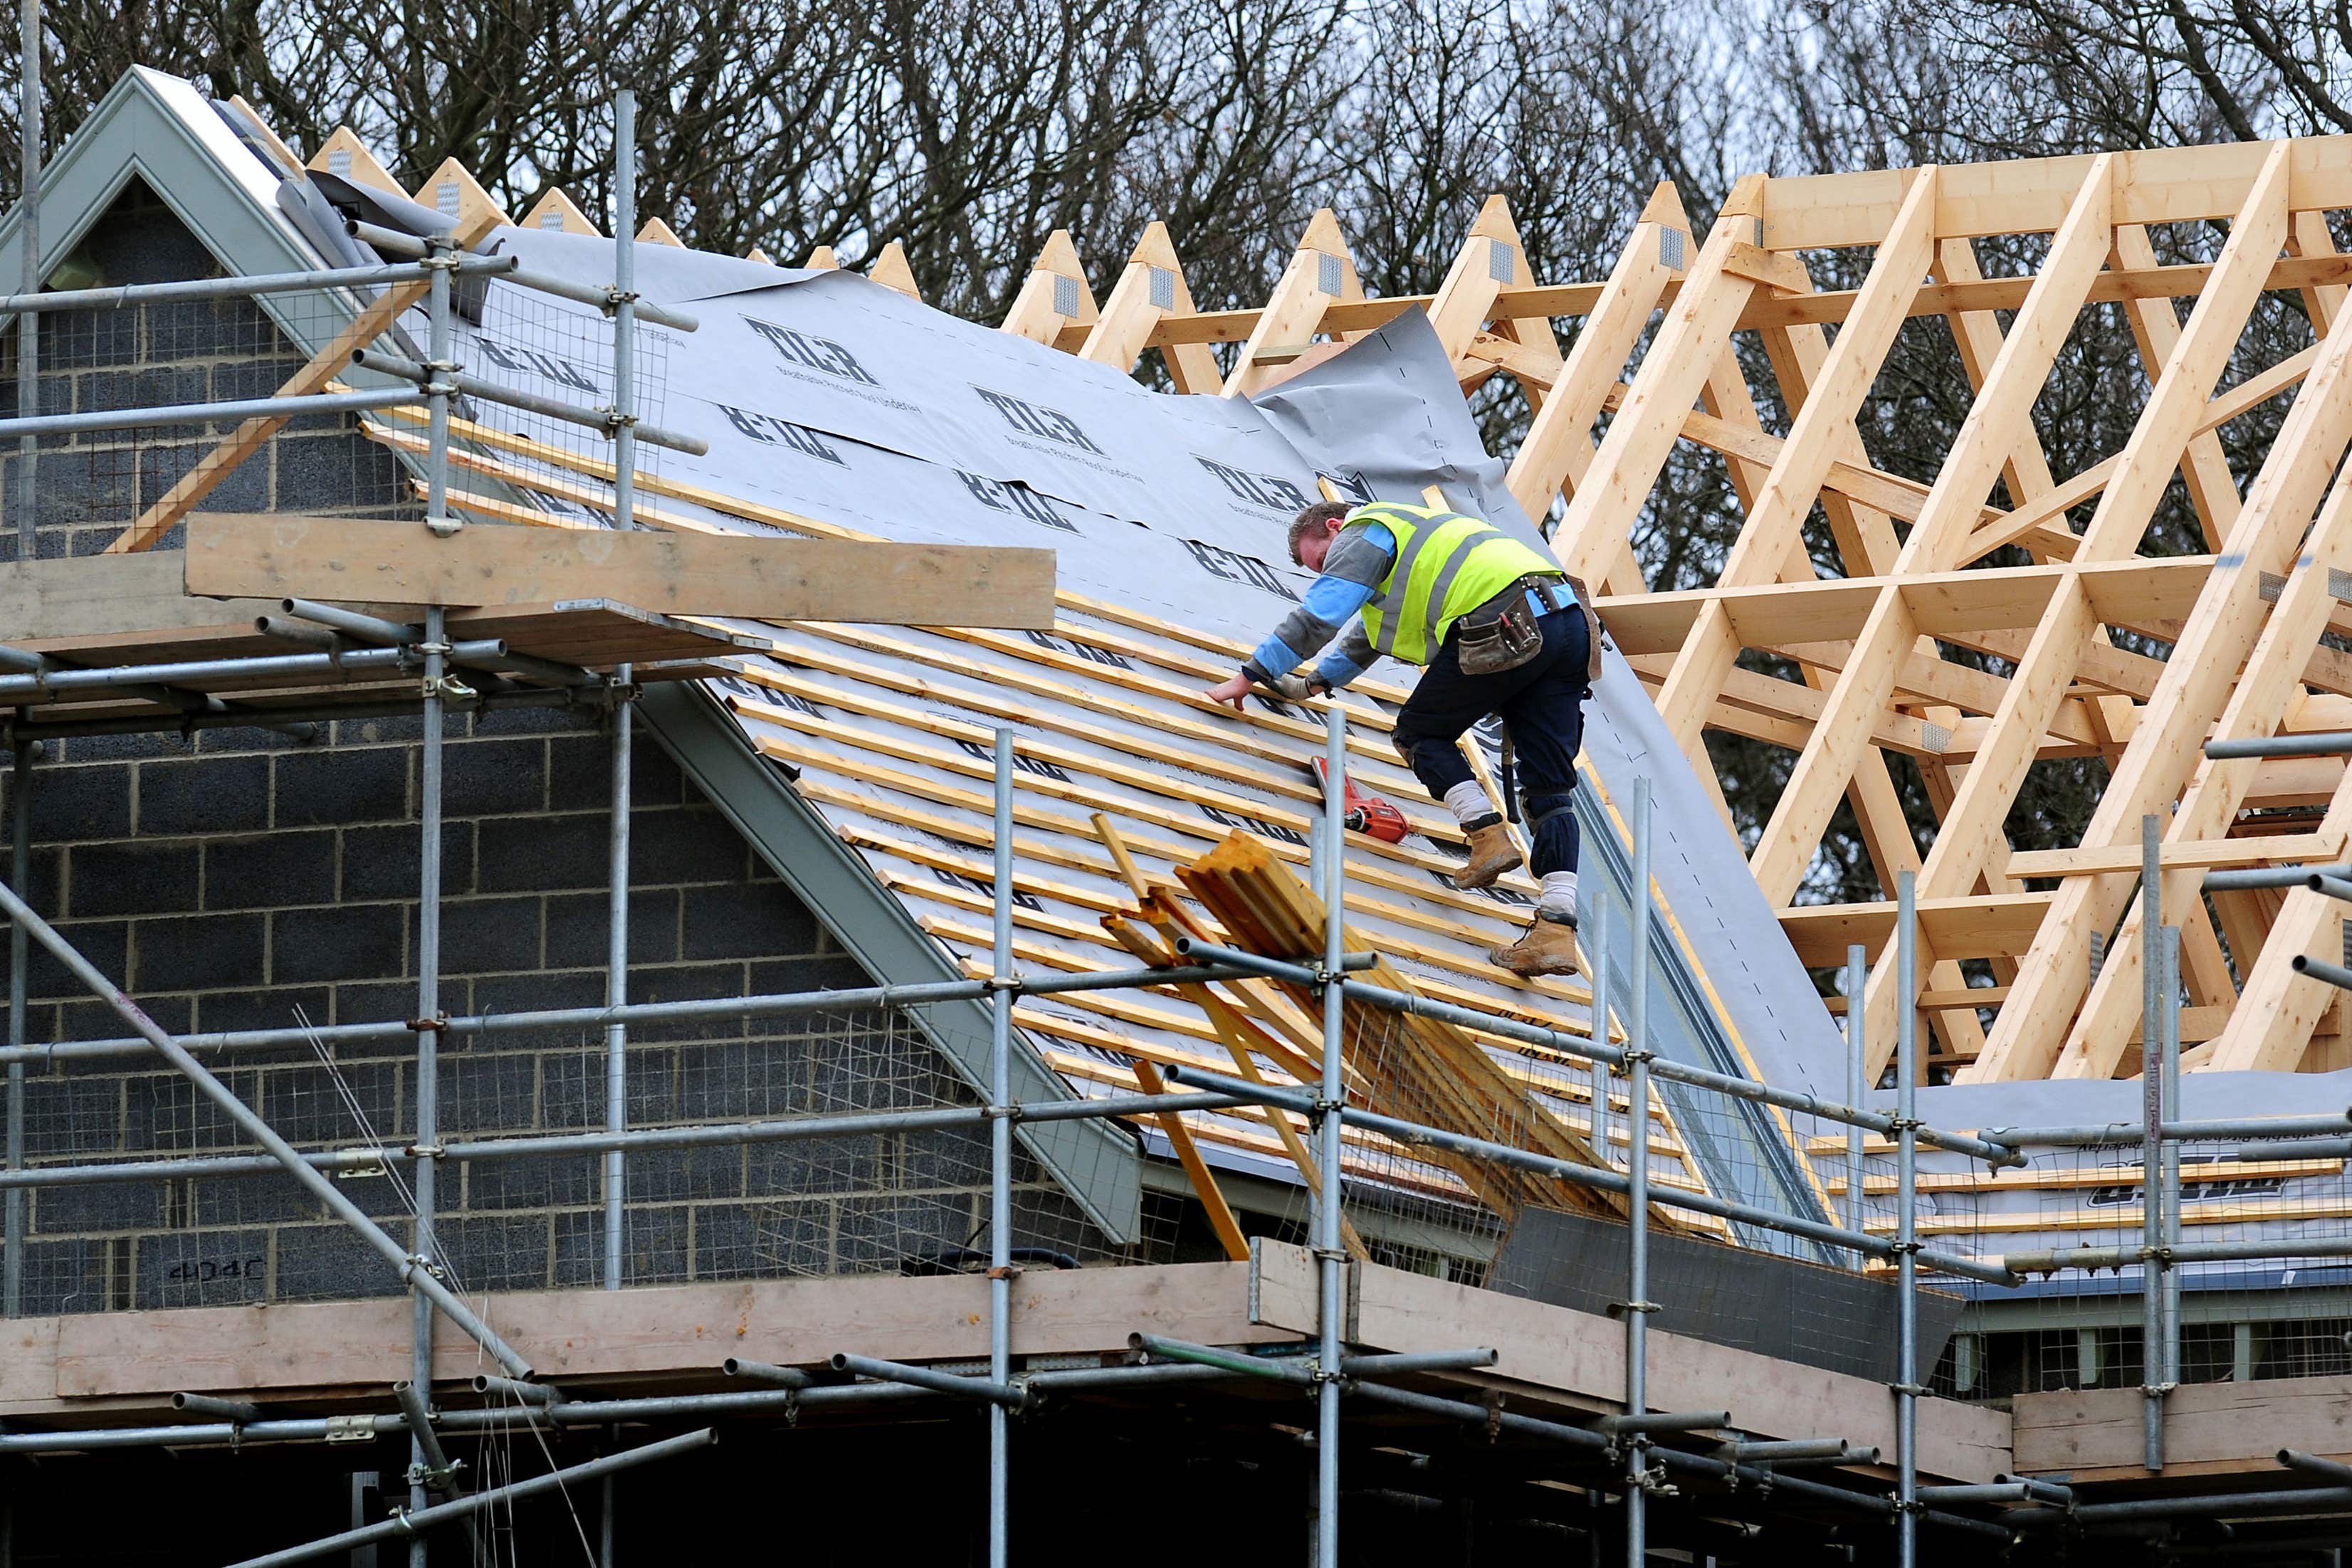 More signs of a slowdown in the housing market have been visible at Crest Nicholson sites across the country